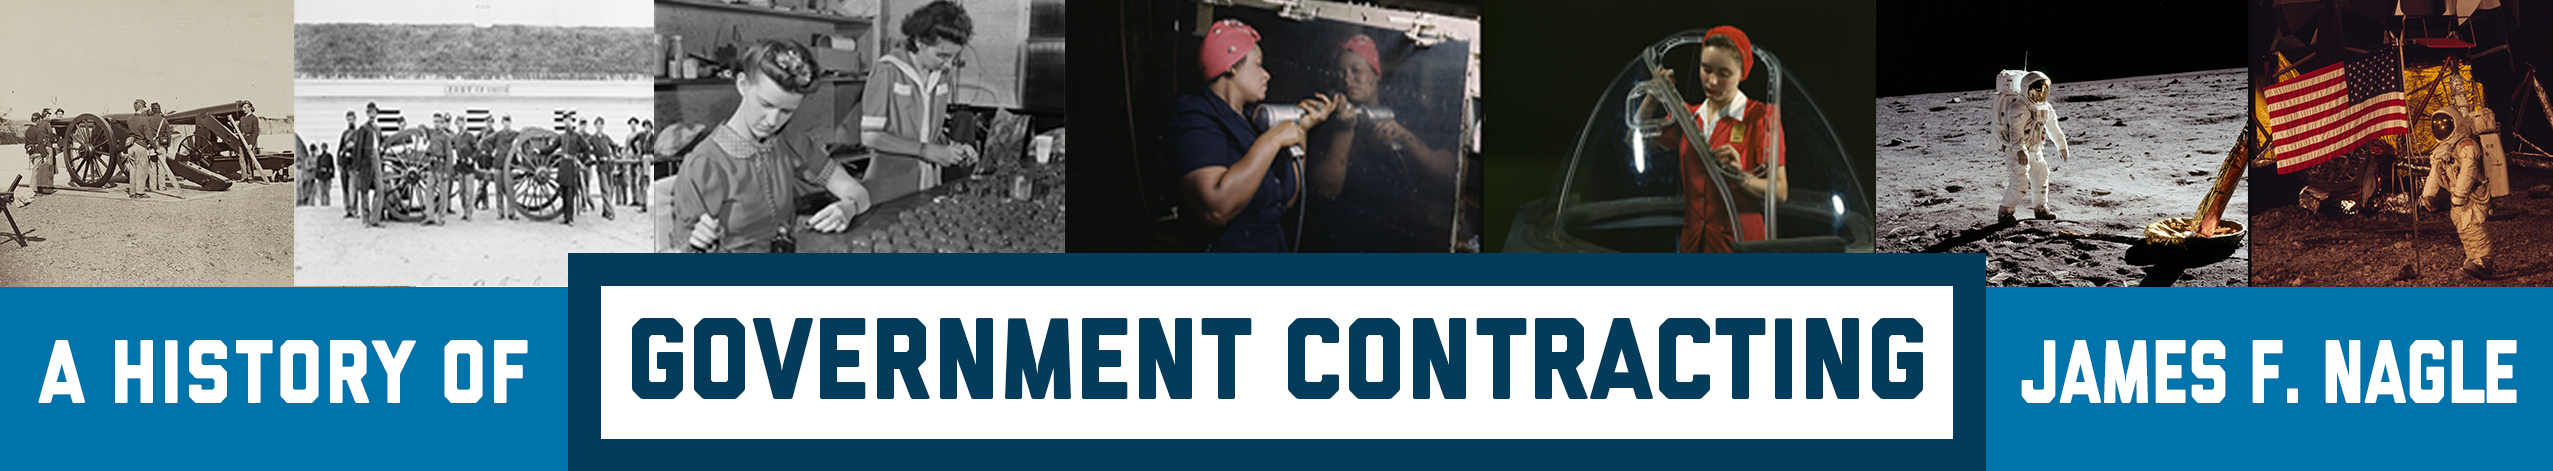 A History of Government Contracting by James F. Nagle. A series of photos depicting government contracting work from the Civil War, World War II, and the moon landing.